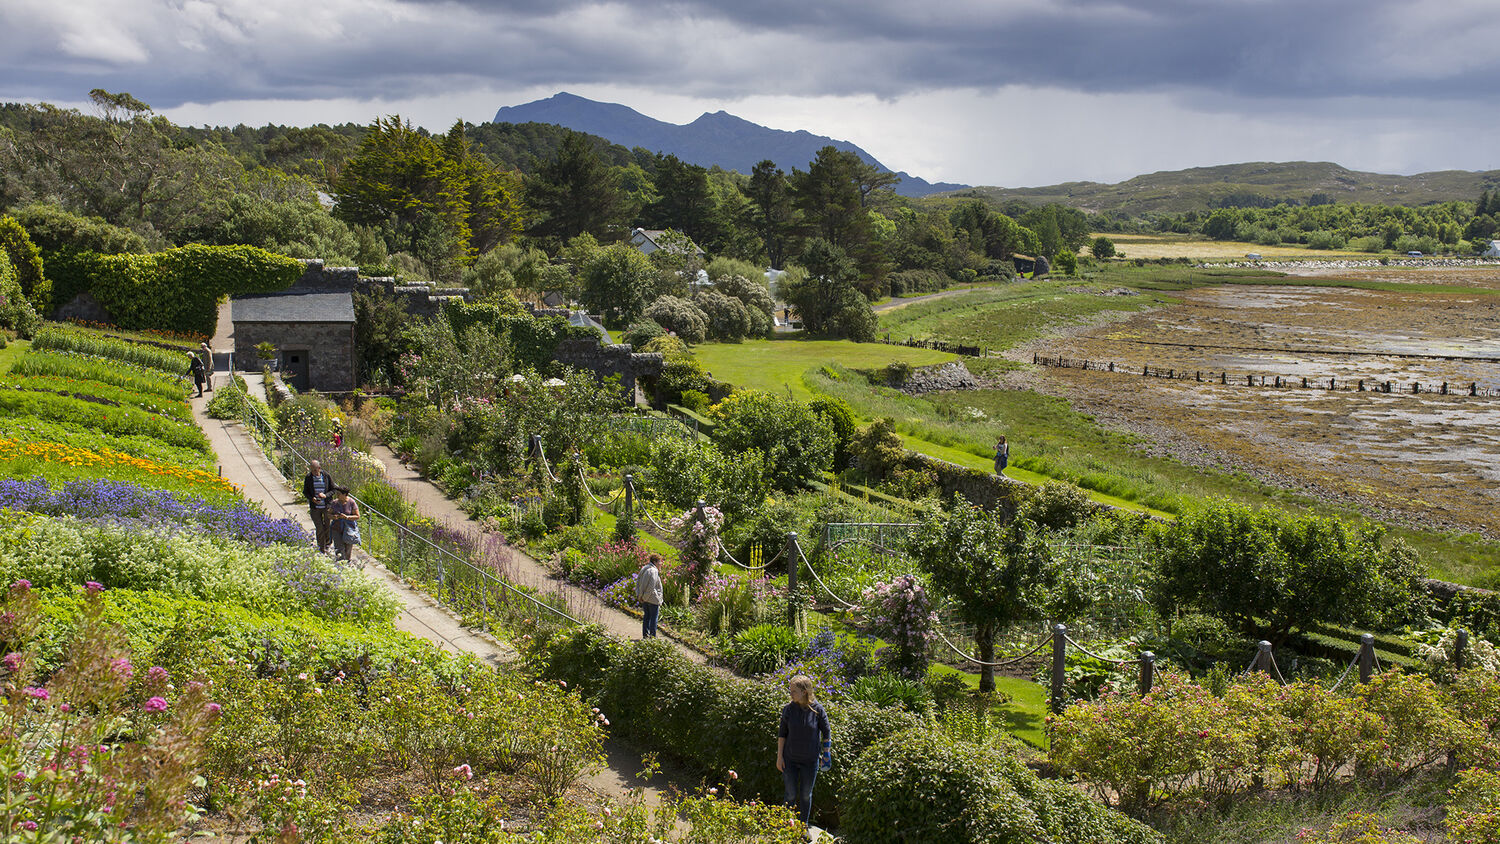 A view across the walled garden of Inverewe Garden. The dark shapes of mountains loom in the distance, and in the garden visitors walk along the pathways.